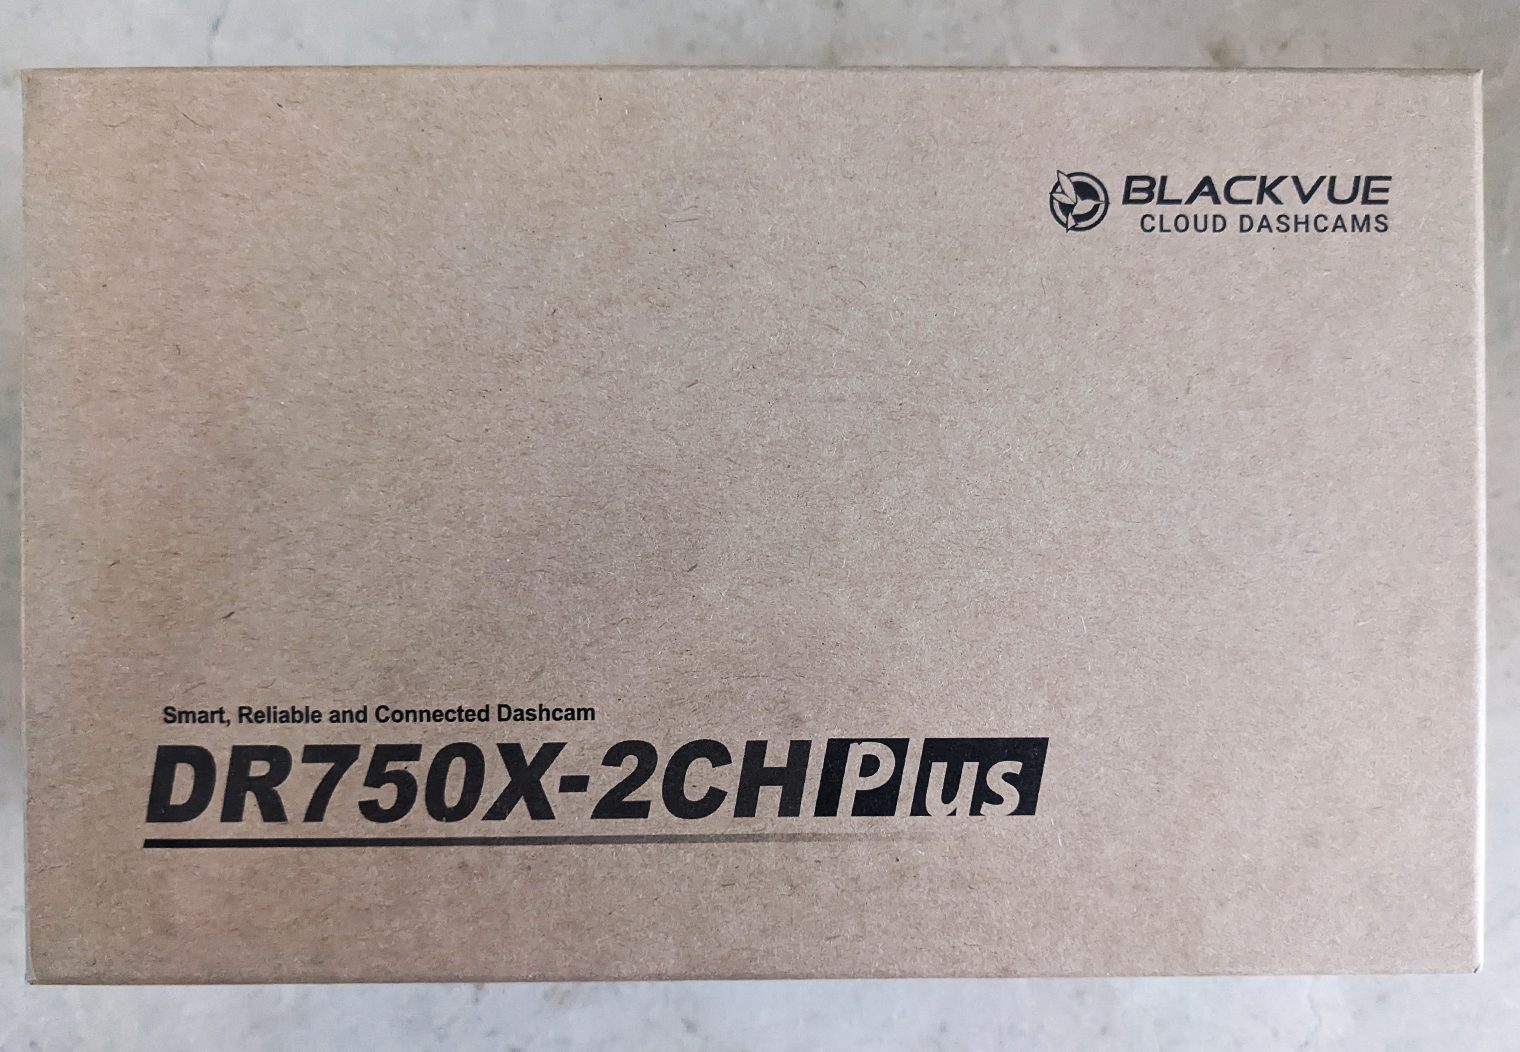 BlackVue DR750X-2CH backup camera in packaging before opening for review